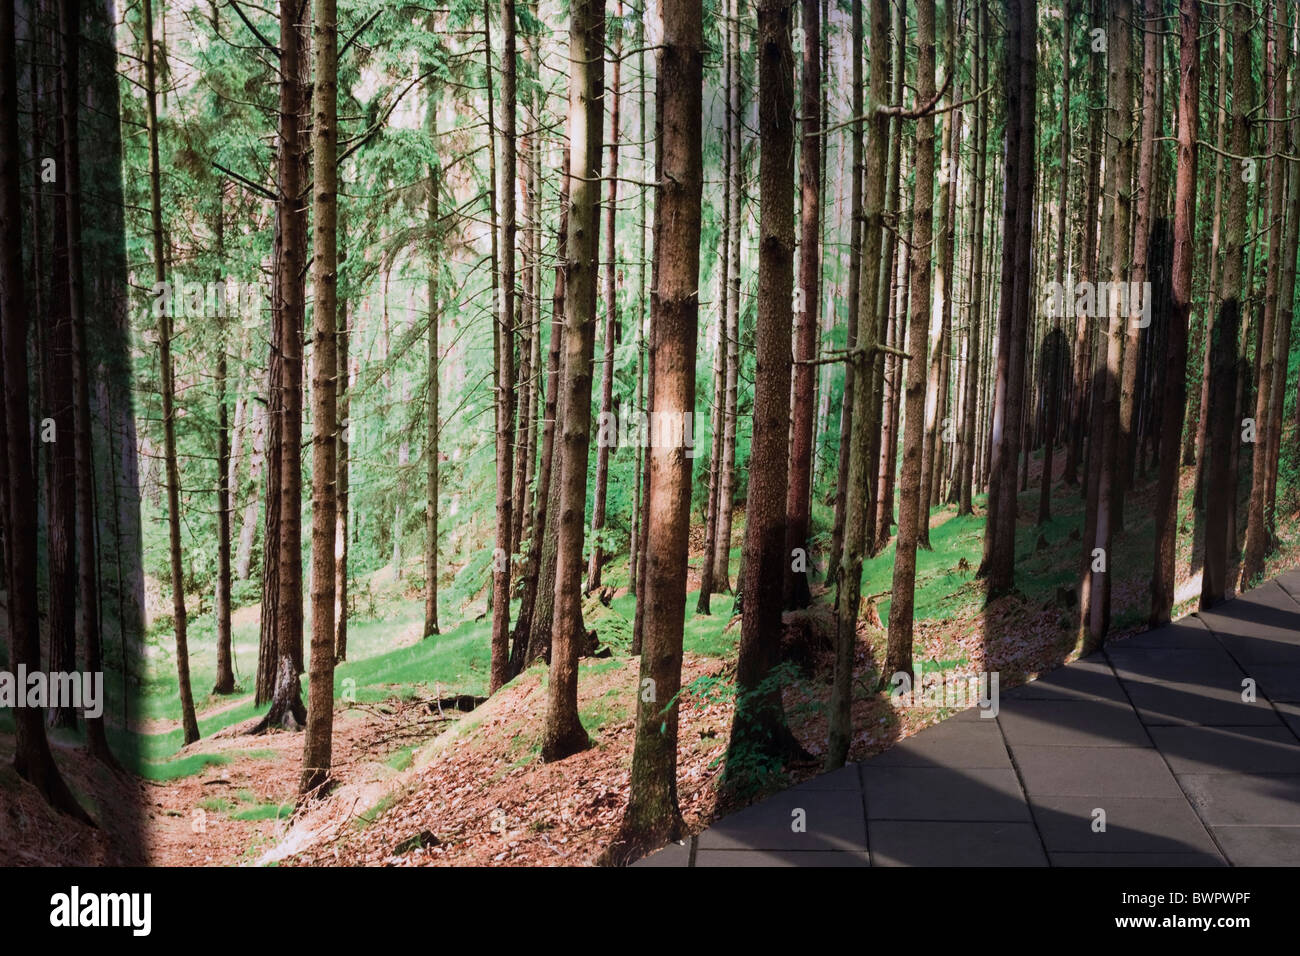 Artwork of forest backdrop with tall, straight pine trees and shadows of anonymous passers-by. Stock Photo